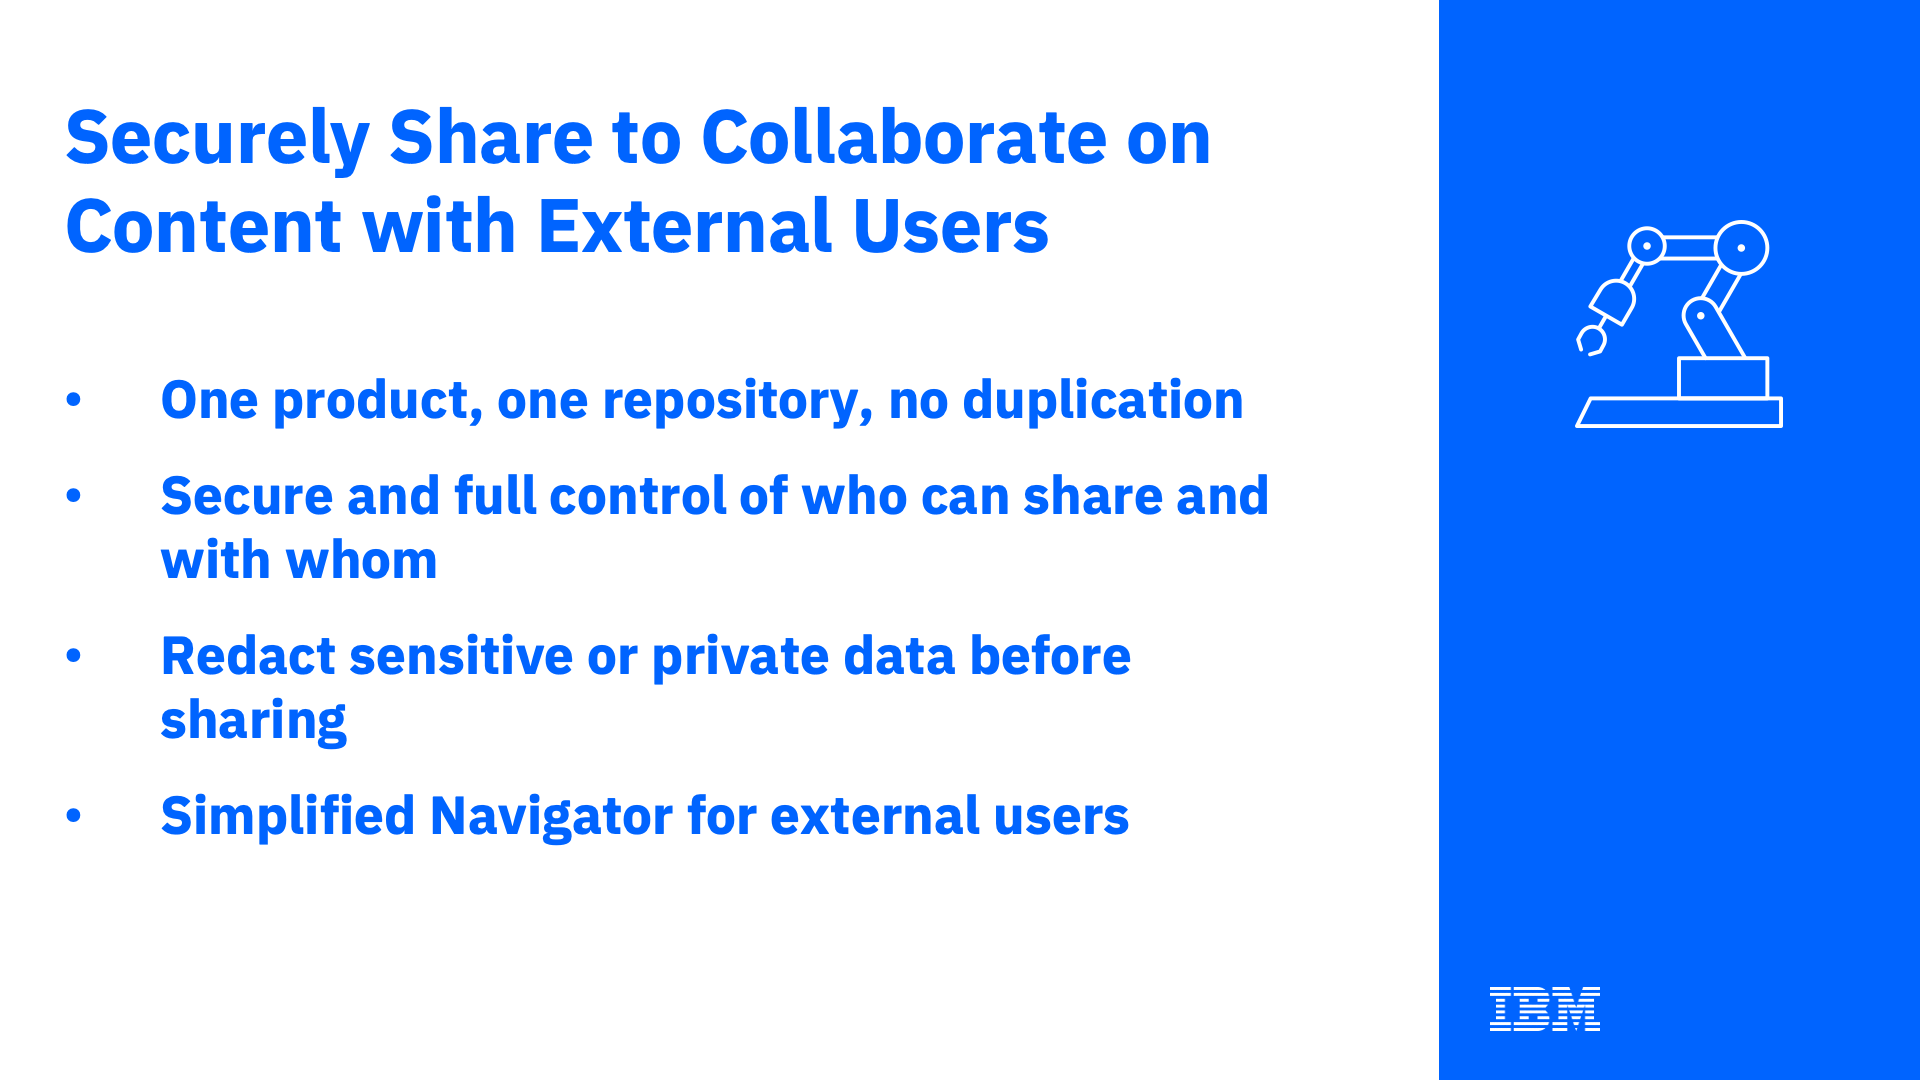 Securely Share Content with External Users